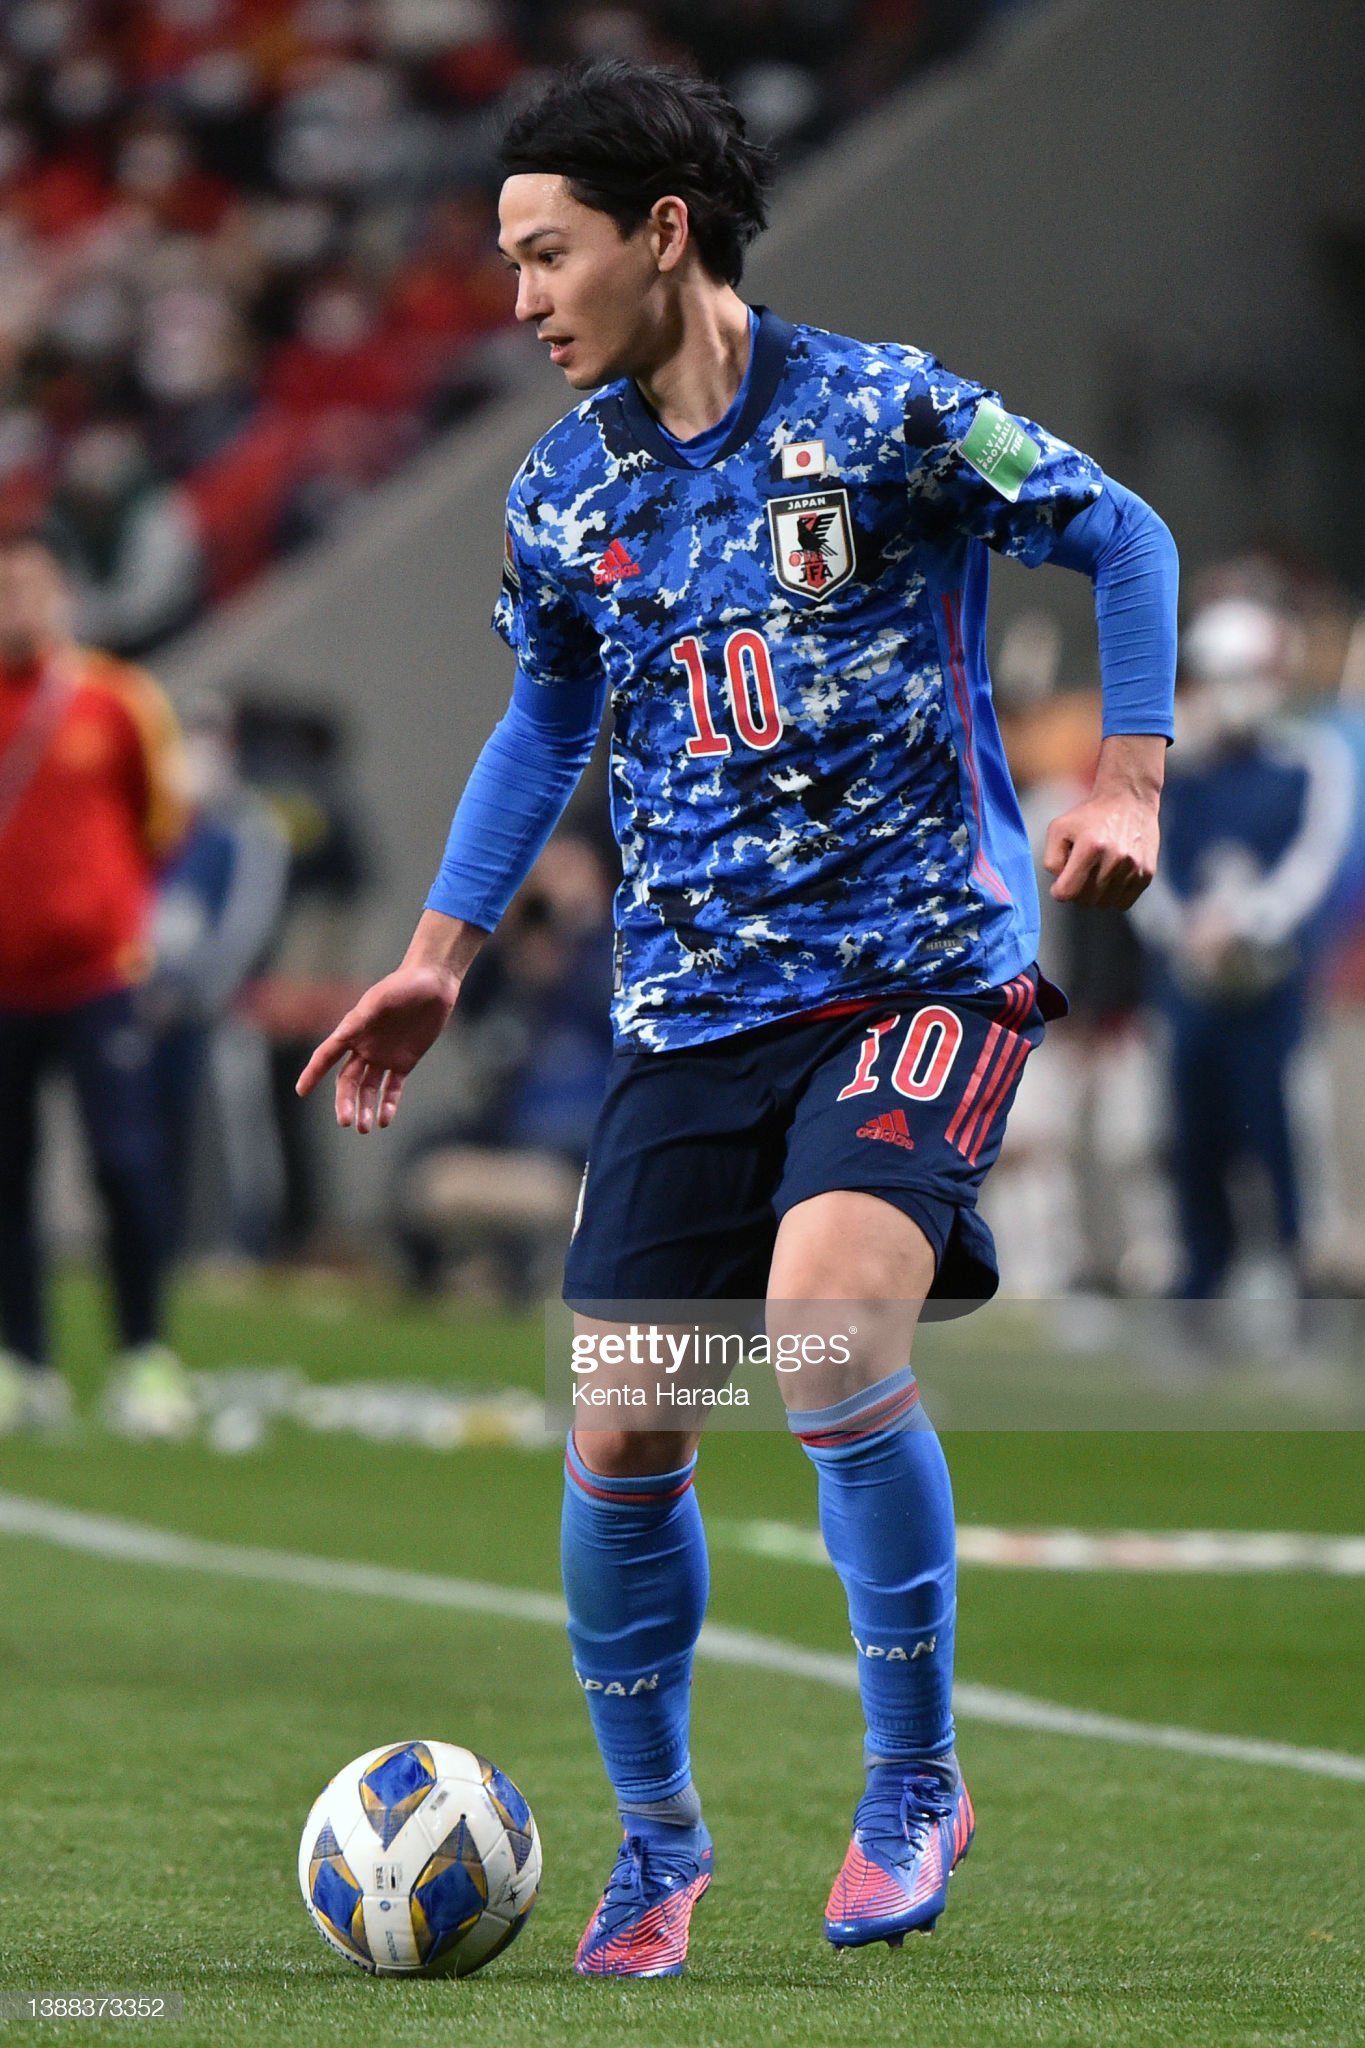 Takumi Minamino of Japan in action during the FIFA World Cup Asian... News Photo - Getty Images